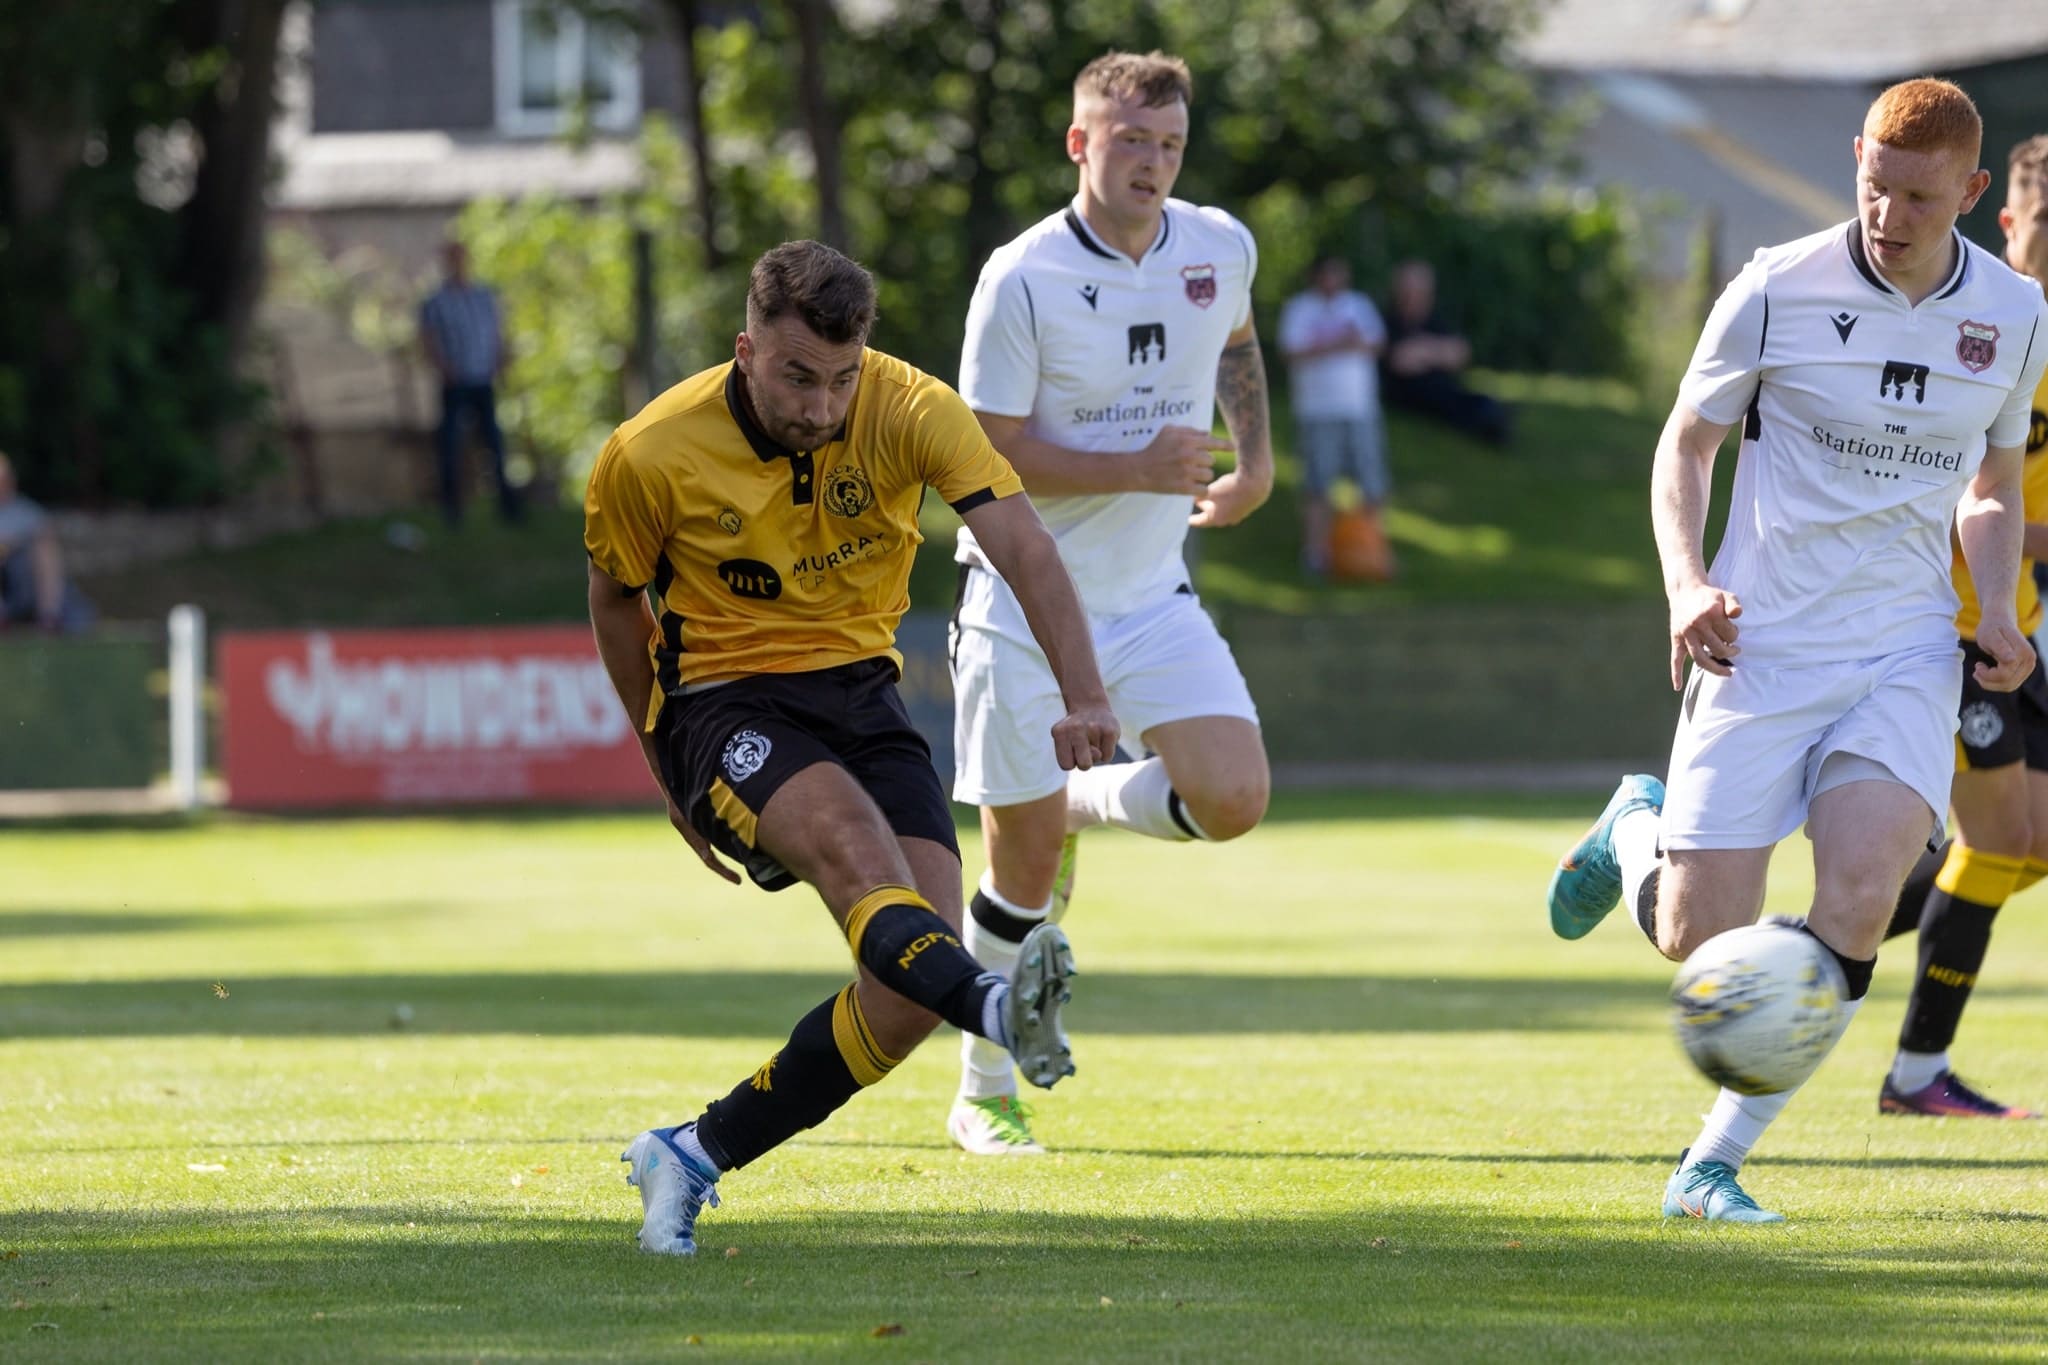 Nairn County Football Club player wearing yellow and black football strip in game of football